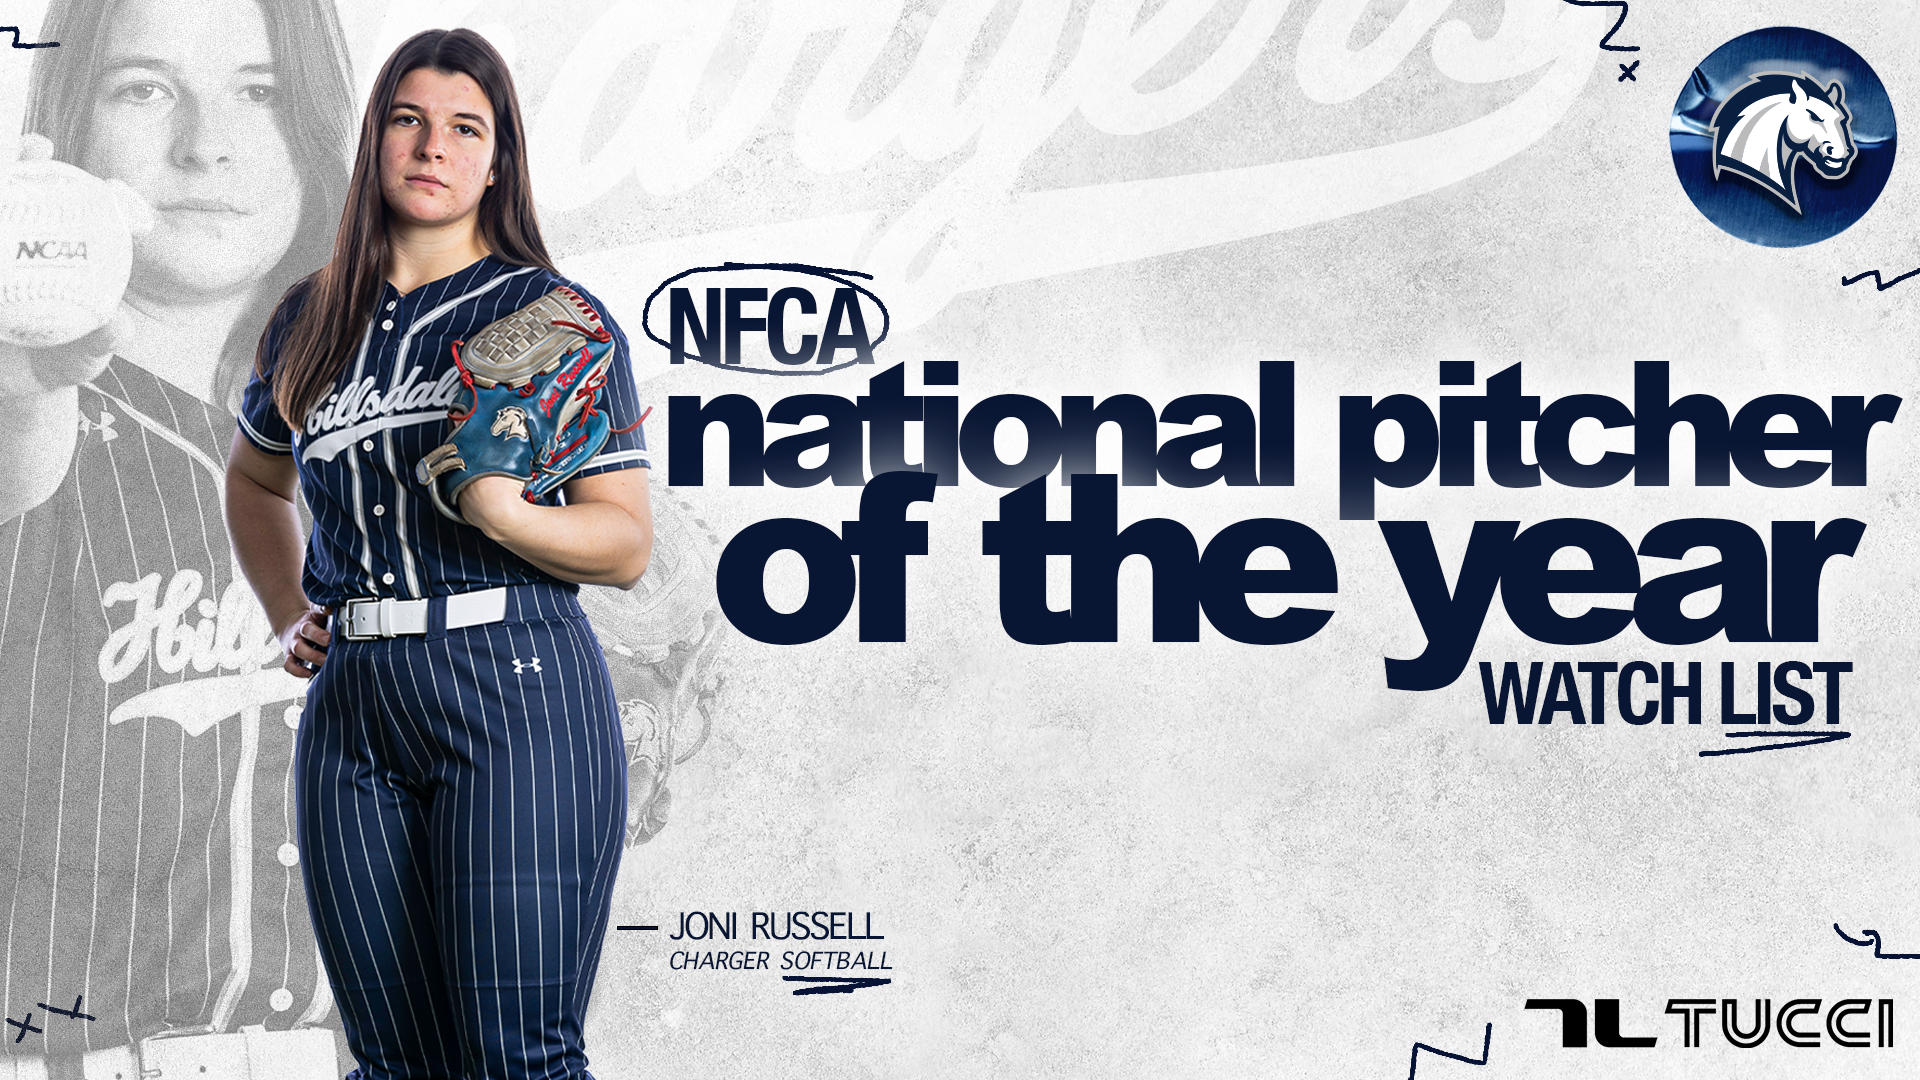 Chargers' Joni Russell makes Tucci/NFCA Division II Pitcher of the Year watch list